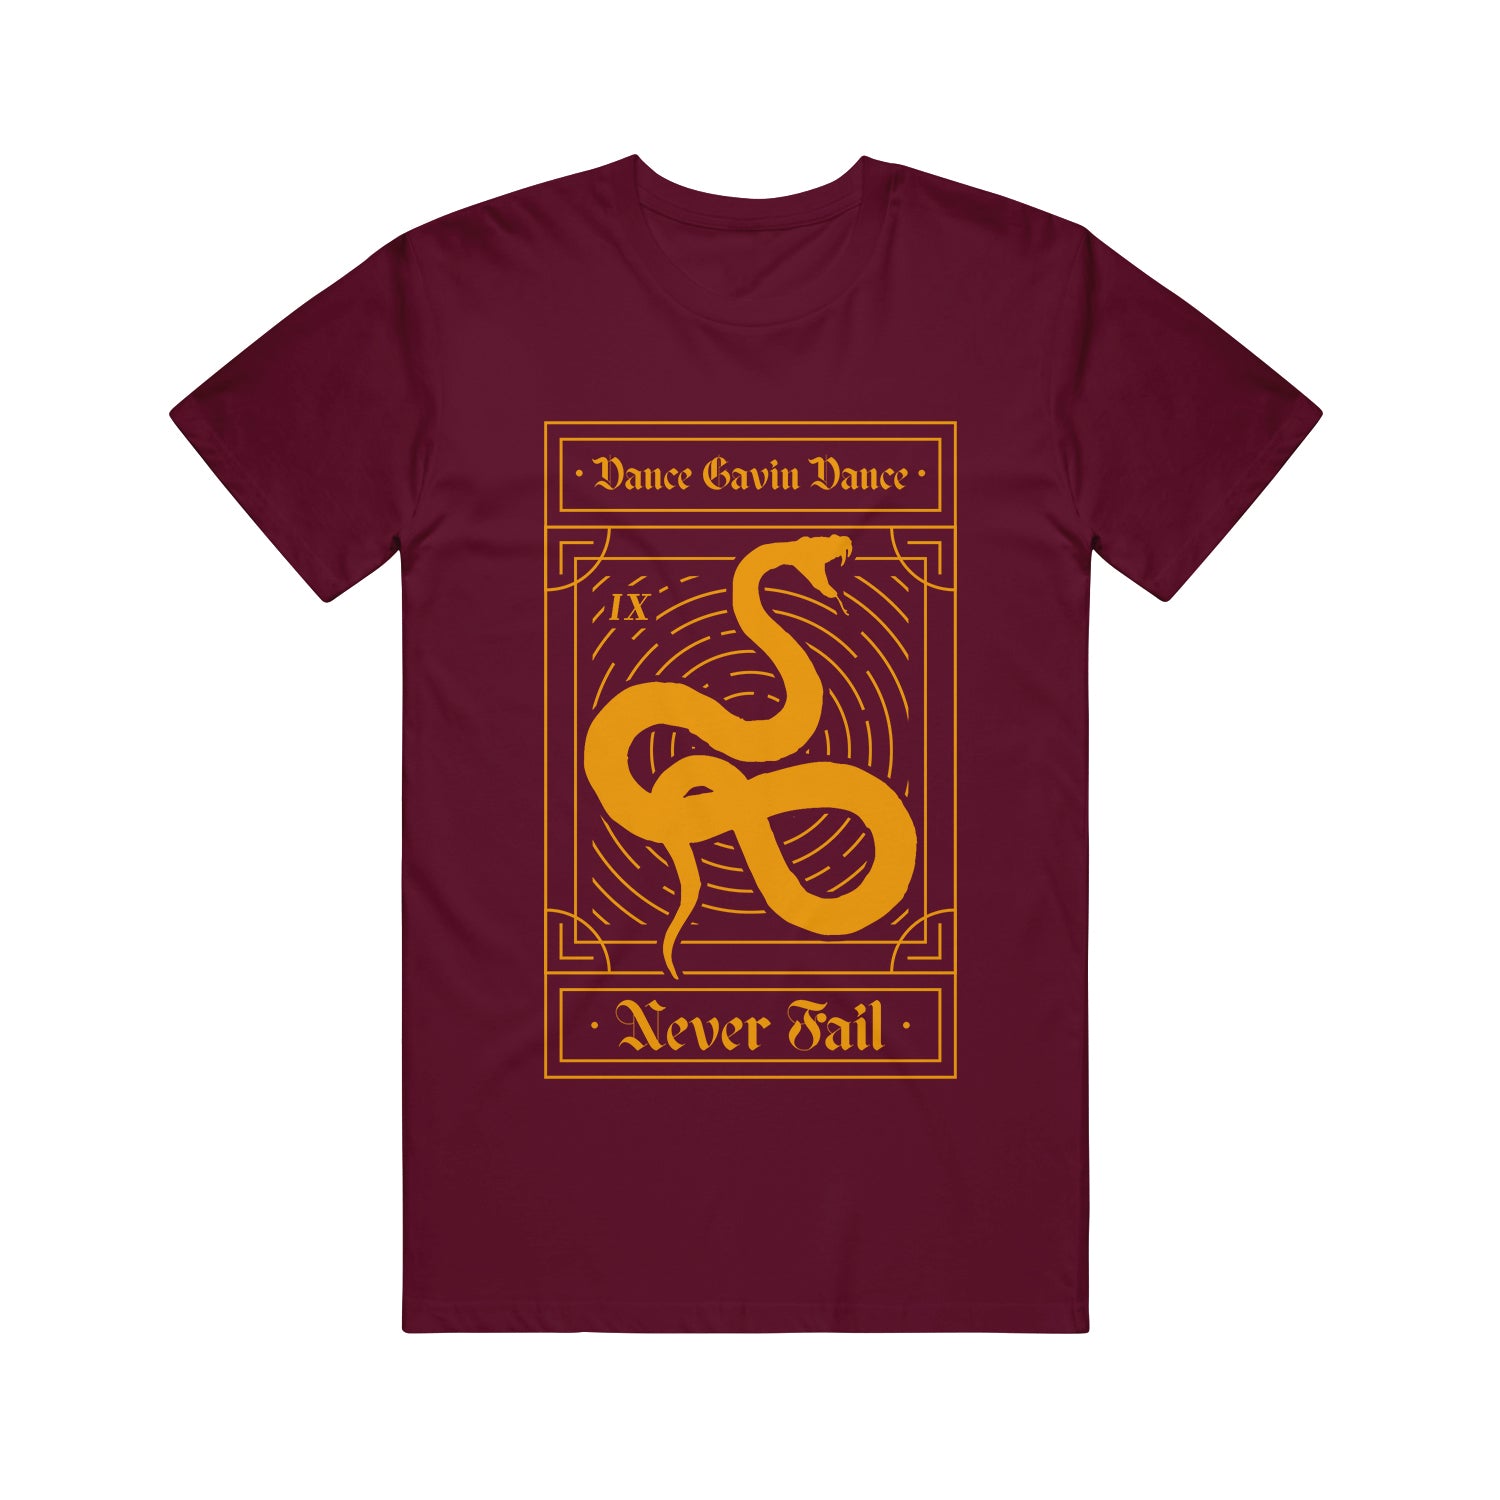 image of a maroon tee shirt on a white background. tee has full body print in gold of a snake tarot card. the top says dance gavin dance and the bottom says never fail